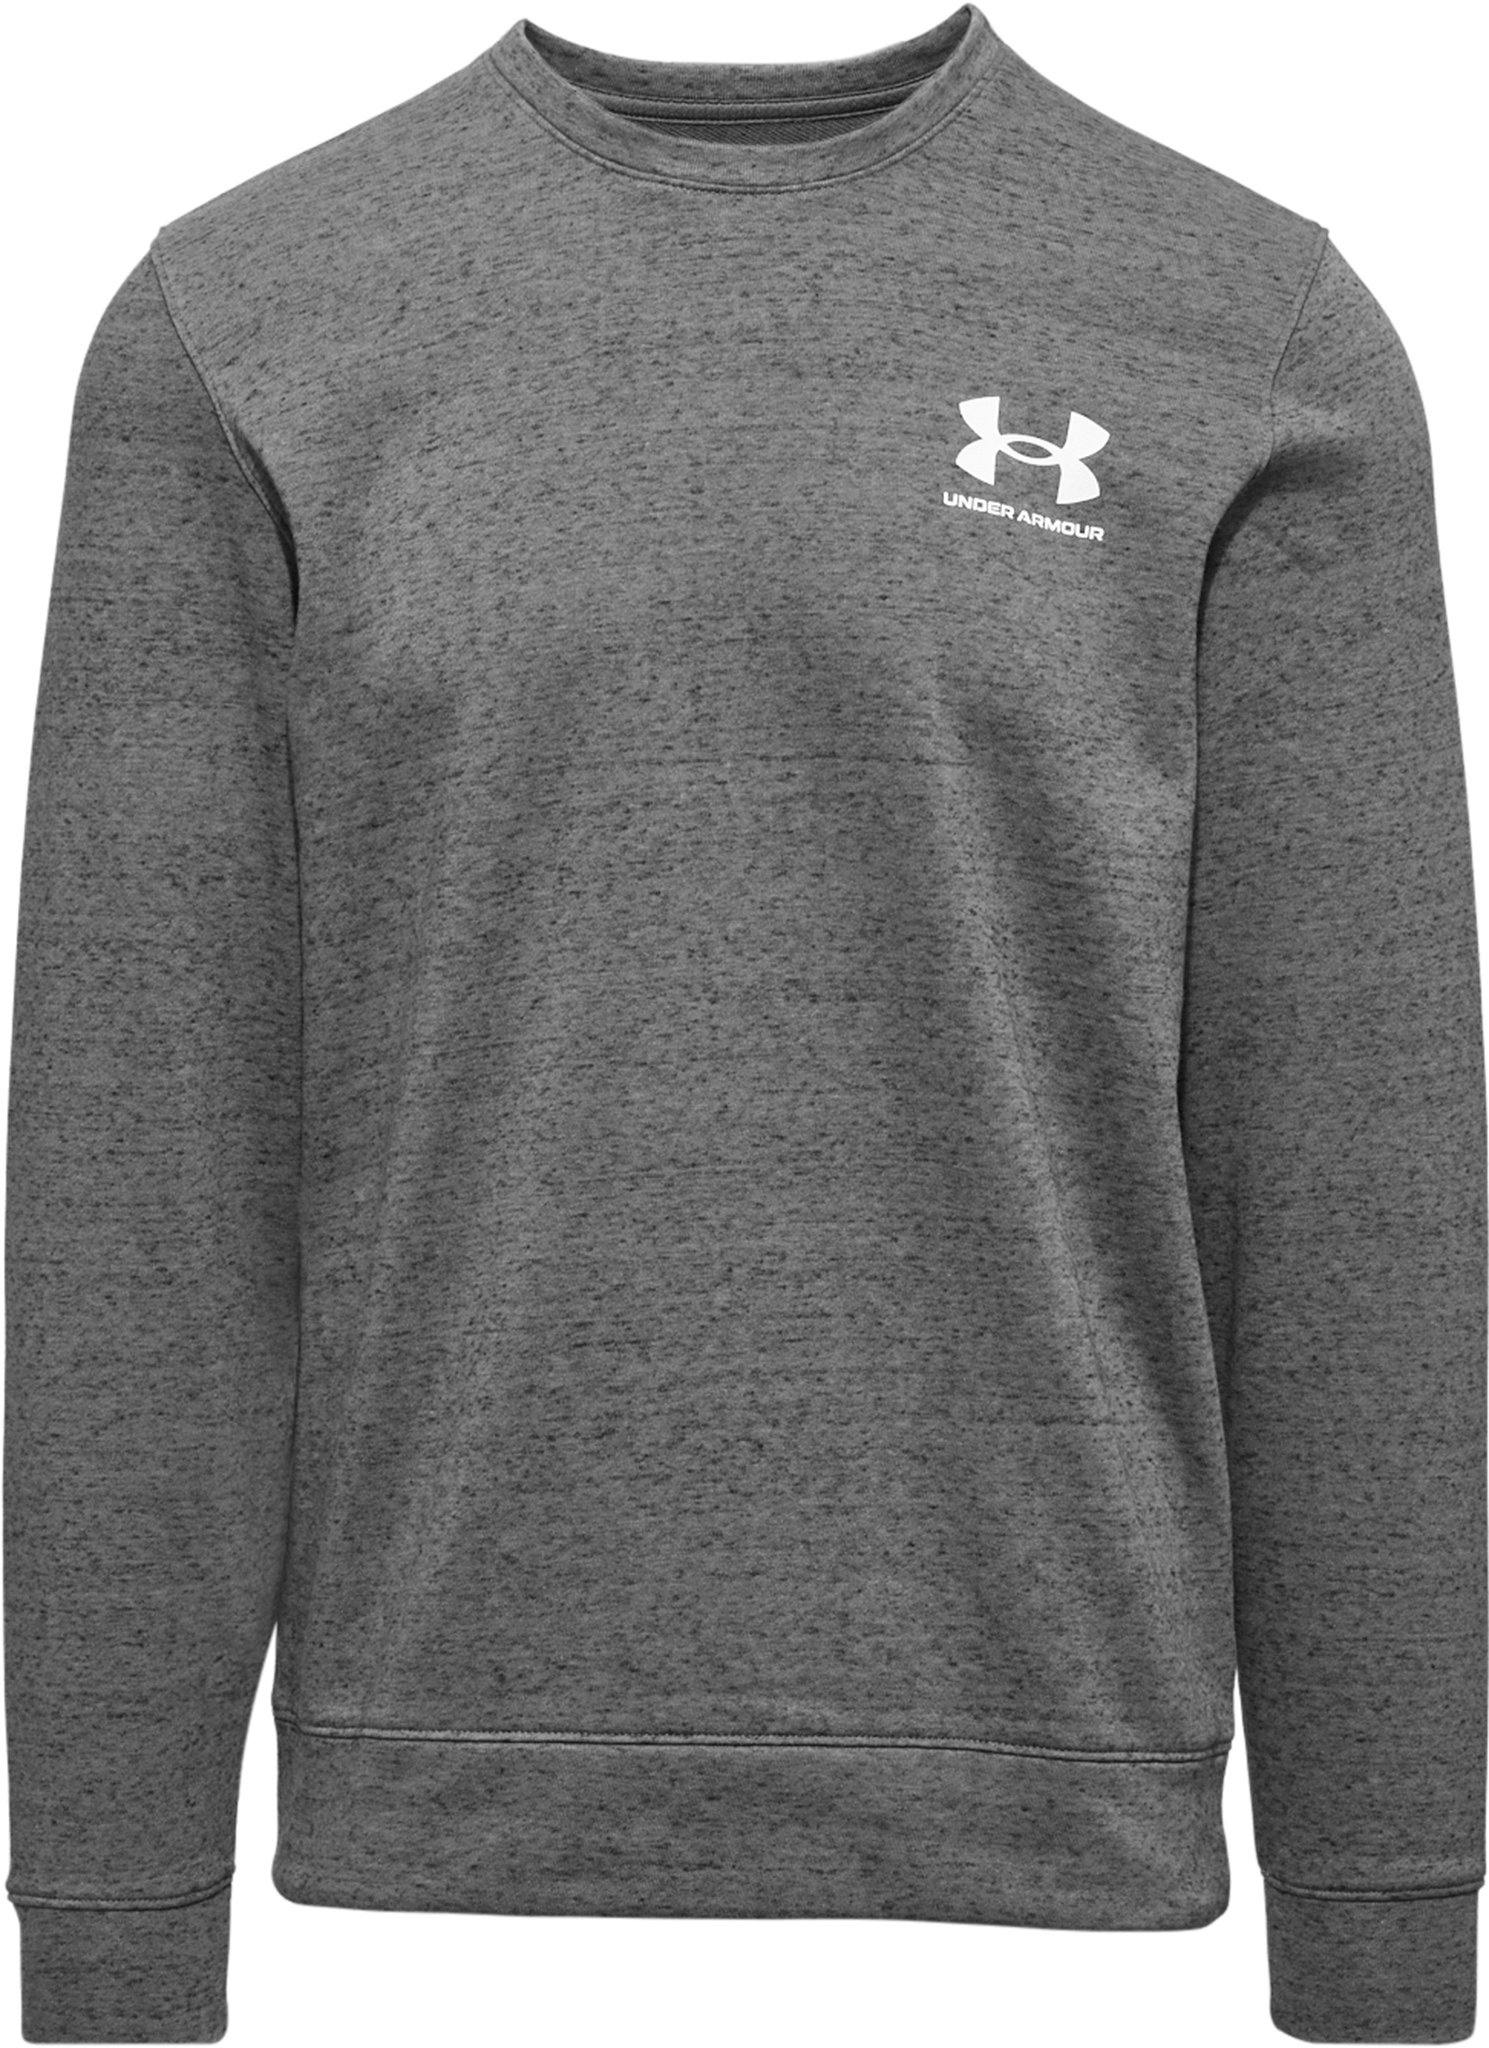 Product image for UA Rival Terry Crewneck Sweater - Men's